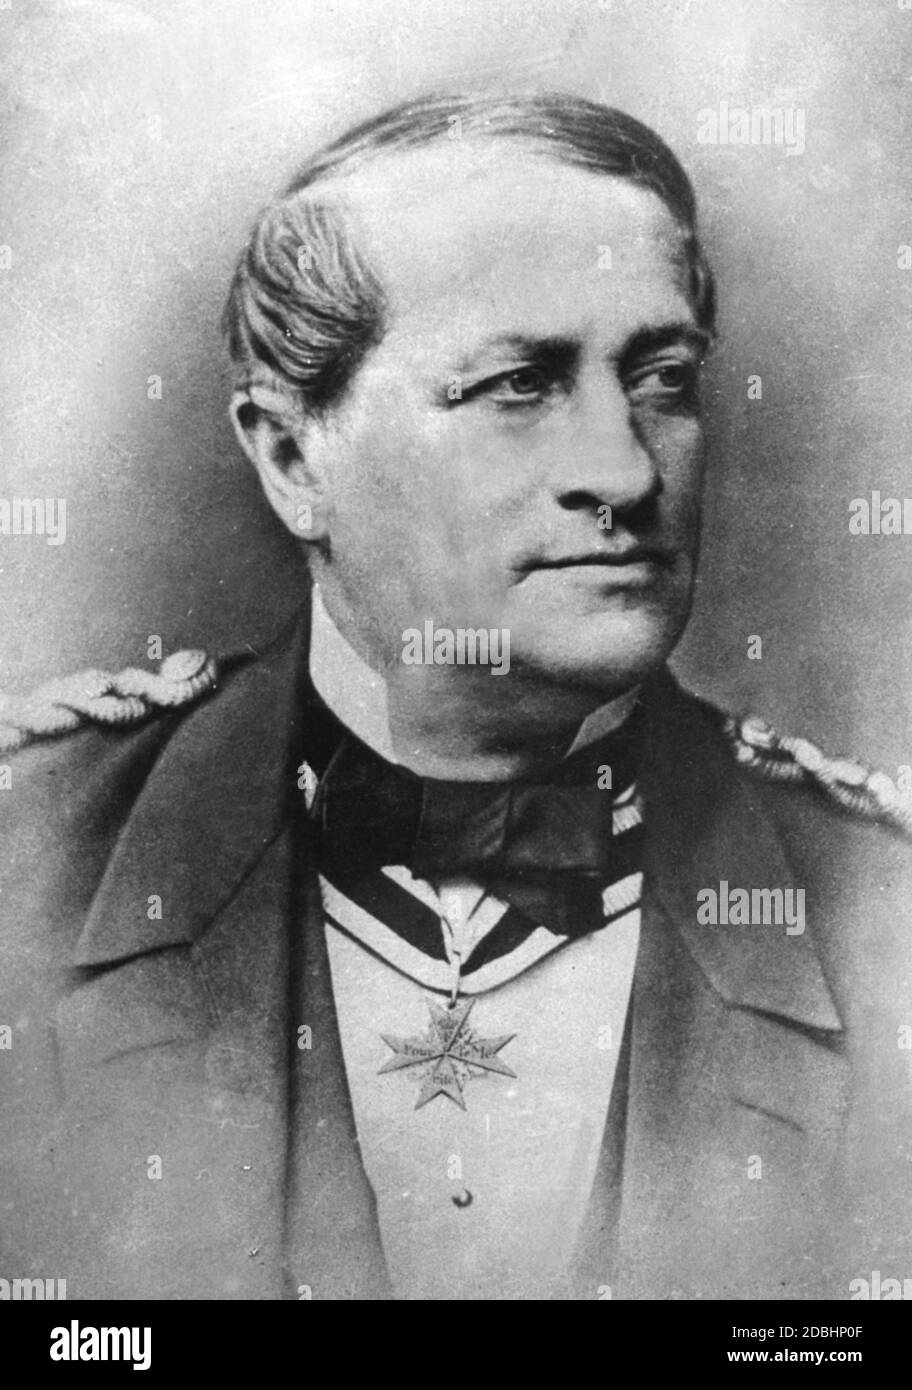 'Prince Adalbert Heinrich Wilhelm of Prussia (1811-1873), Admiral of the Prussian Navy and bearer of the order ''Pour le Merite''. The photo was probably taken in the 1860s.' Stock Photo